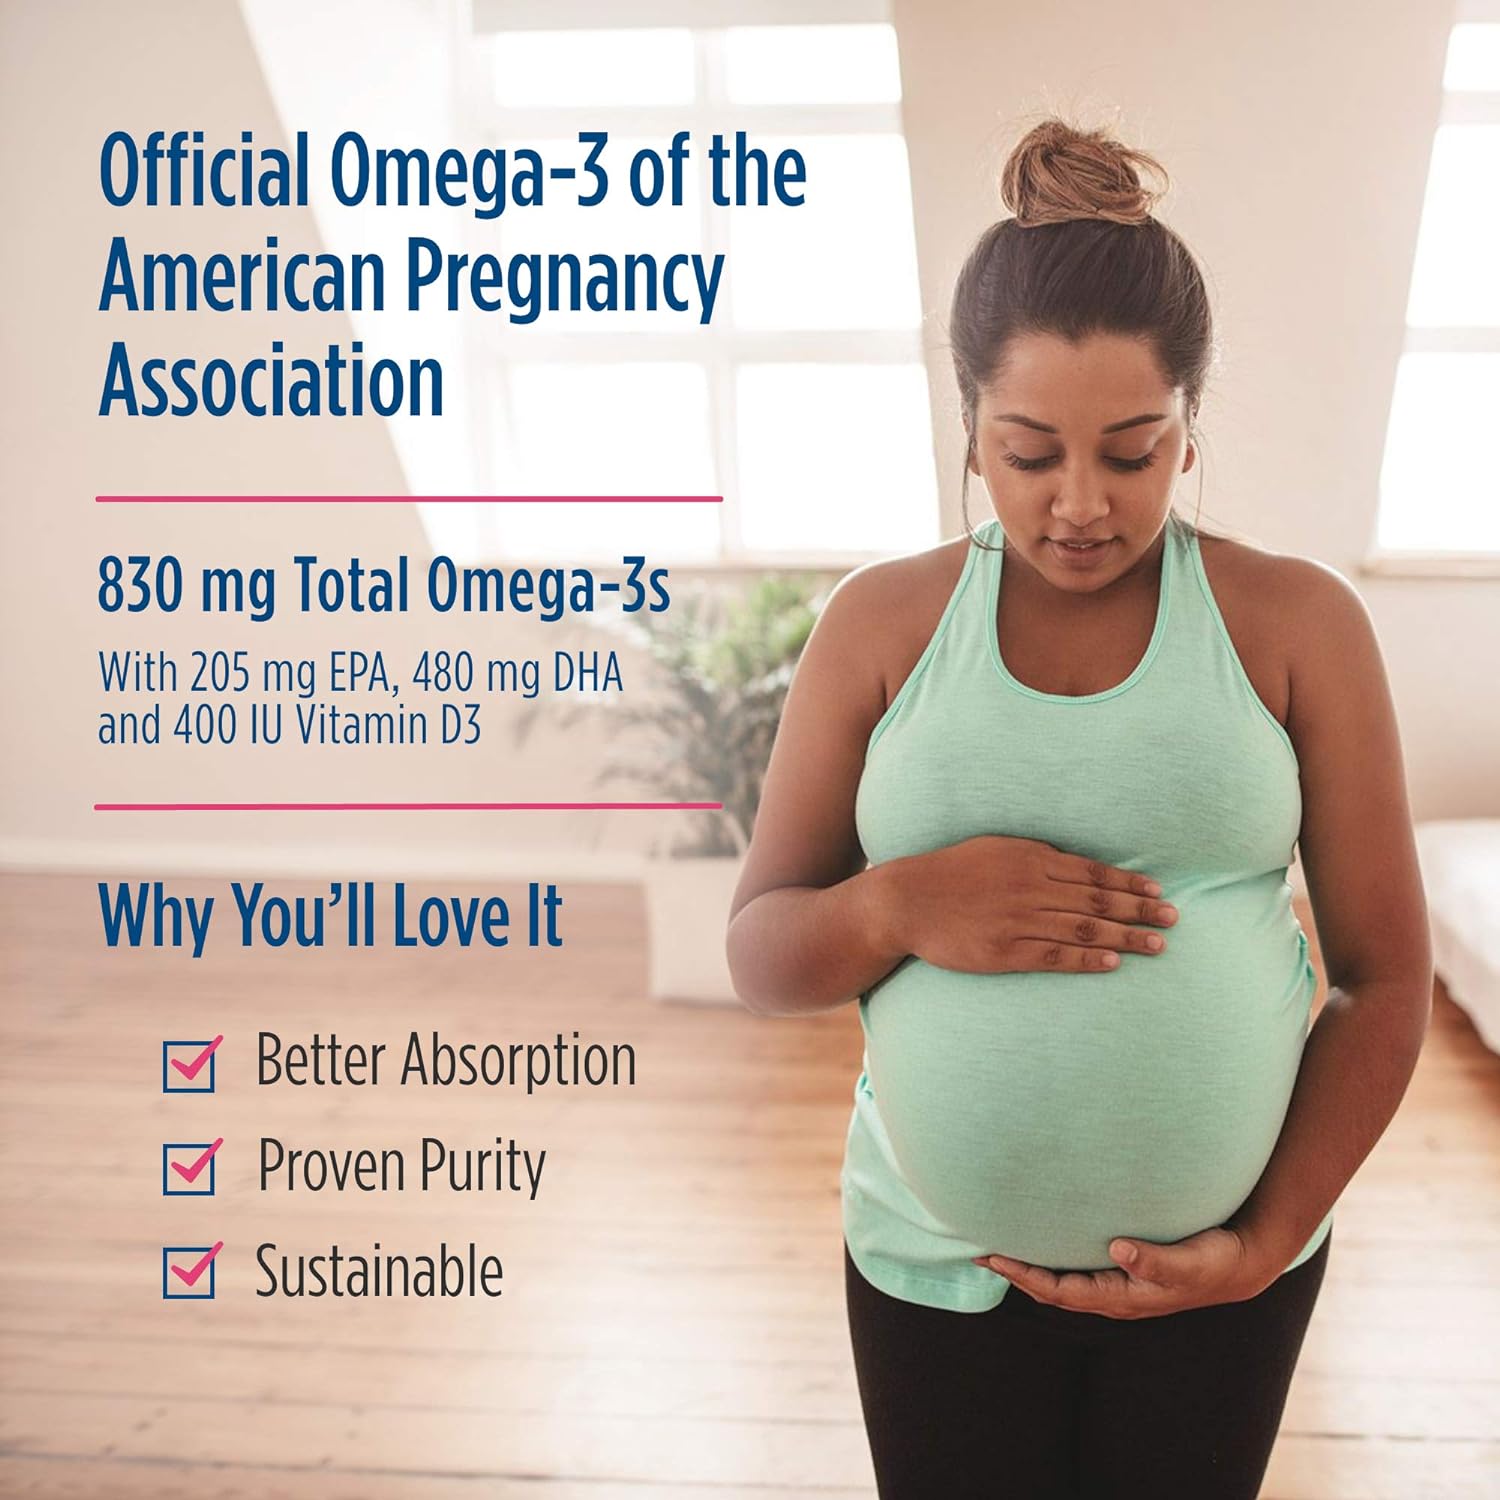 Nordic Naturals Prenatal DHA, Unflavored - 90 Soft Gels - 830 mg Omega-3 + 400 IU Vitamin D3 - Supports Brain Development in Babies During Pregnancy  Lactation - Non-GMO - 45 Servings